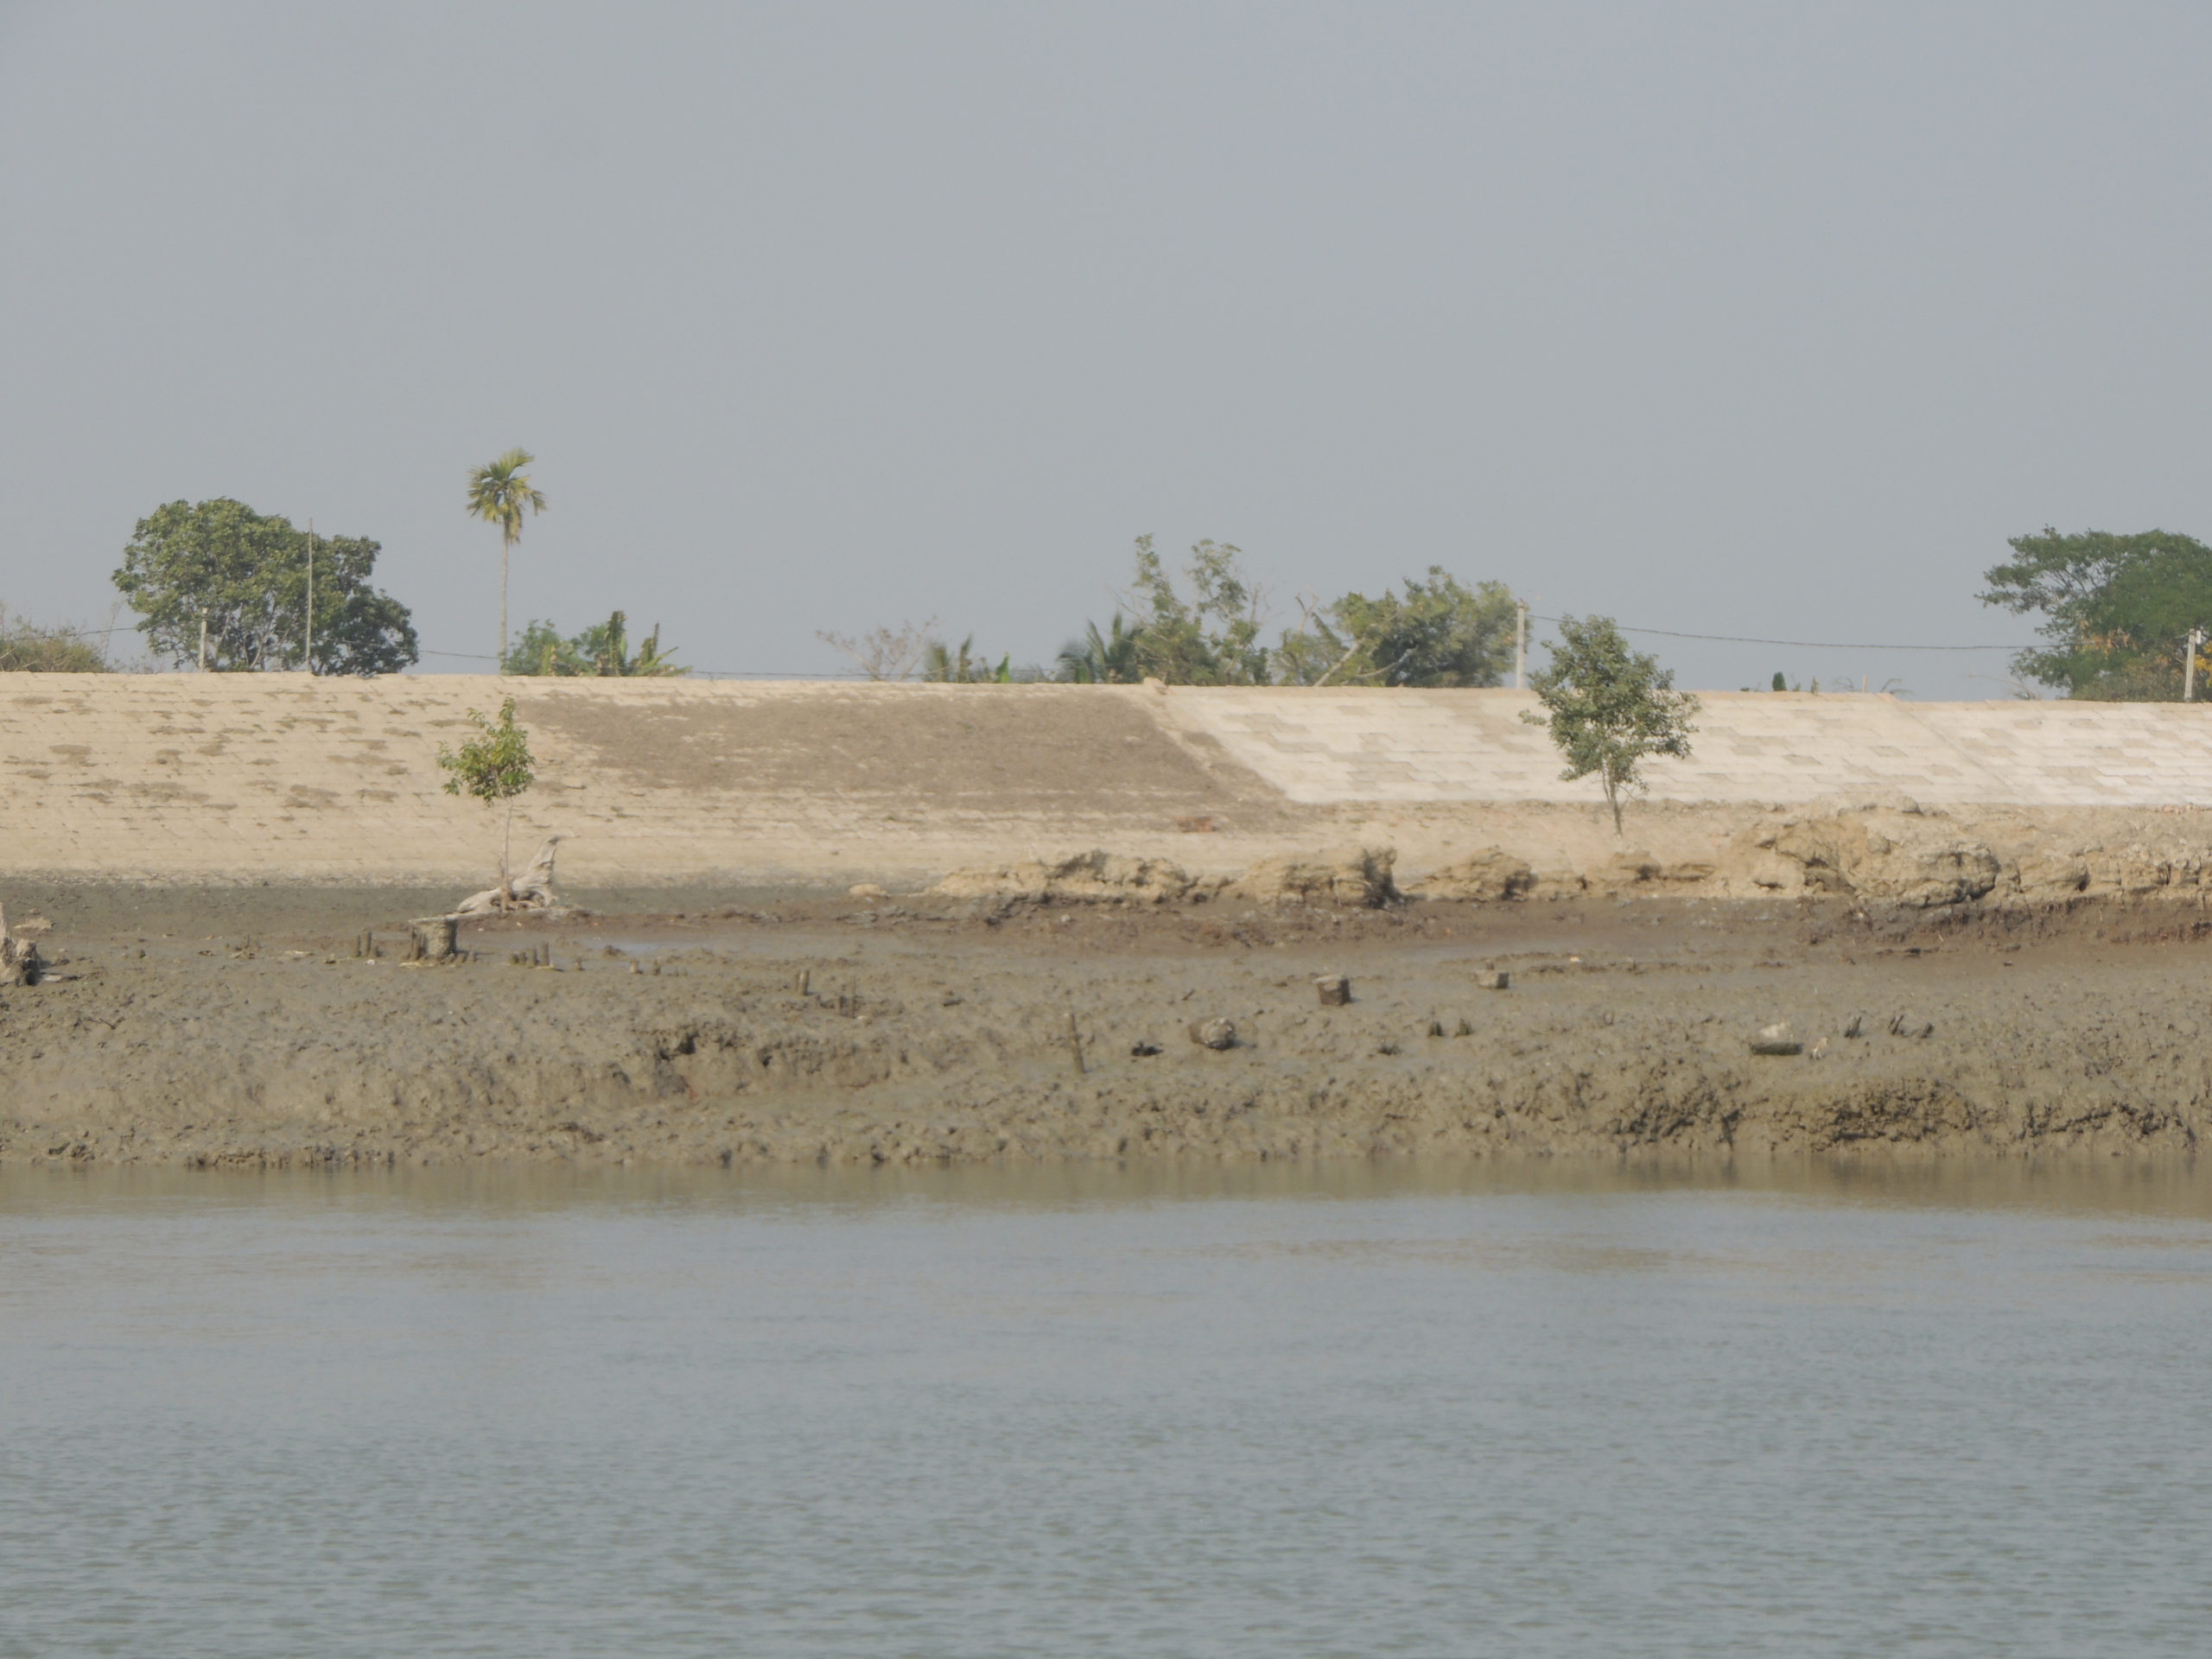 One of the embankments built in the Sundarbans after the 2009 cyclone Aila (Image: Jayanta Basu)